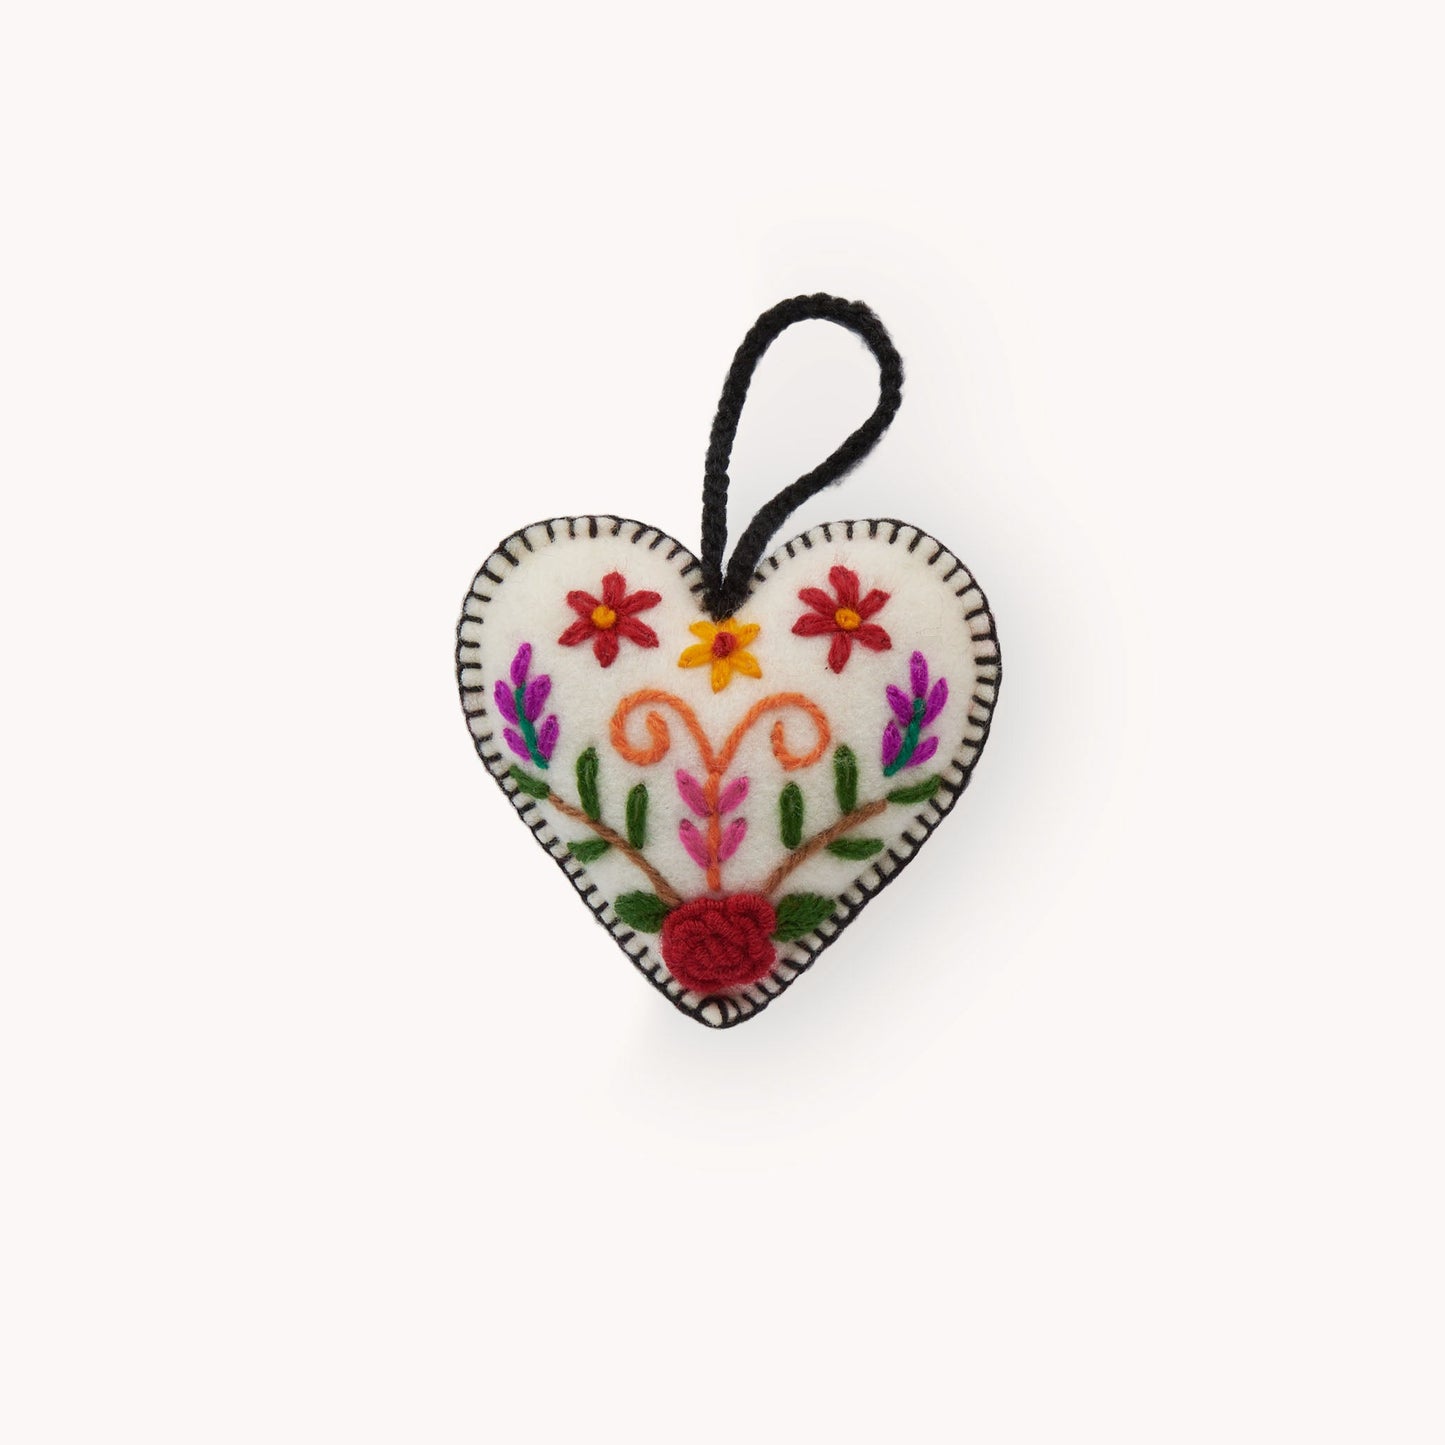 Hand-Embroidered Ornament by POKOLOKO